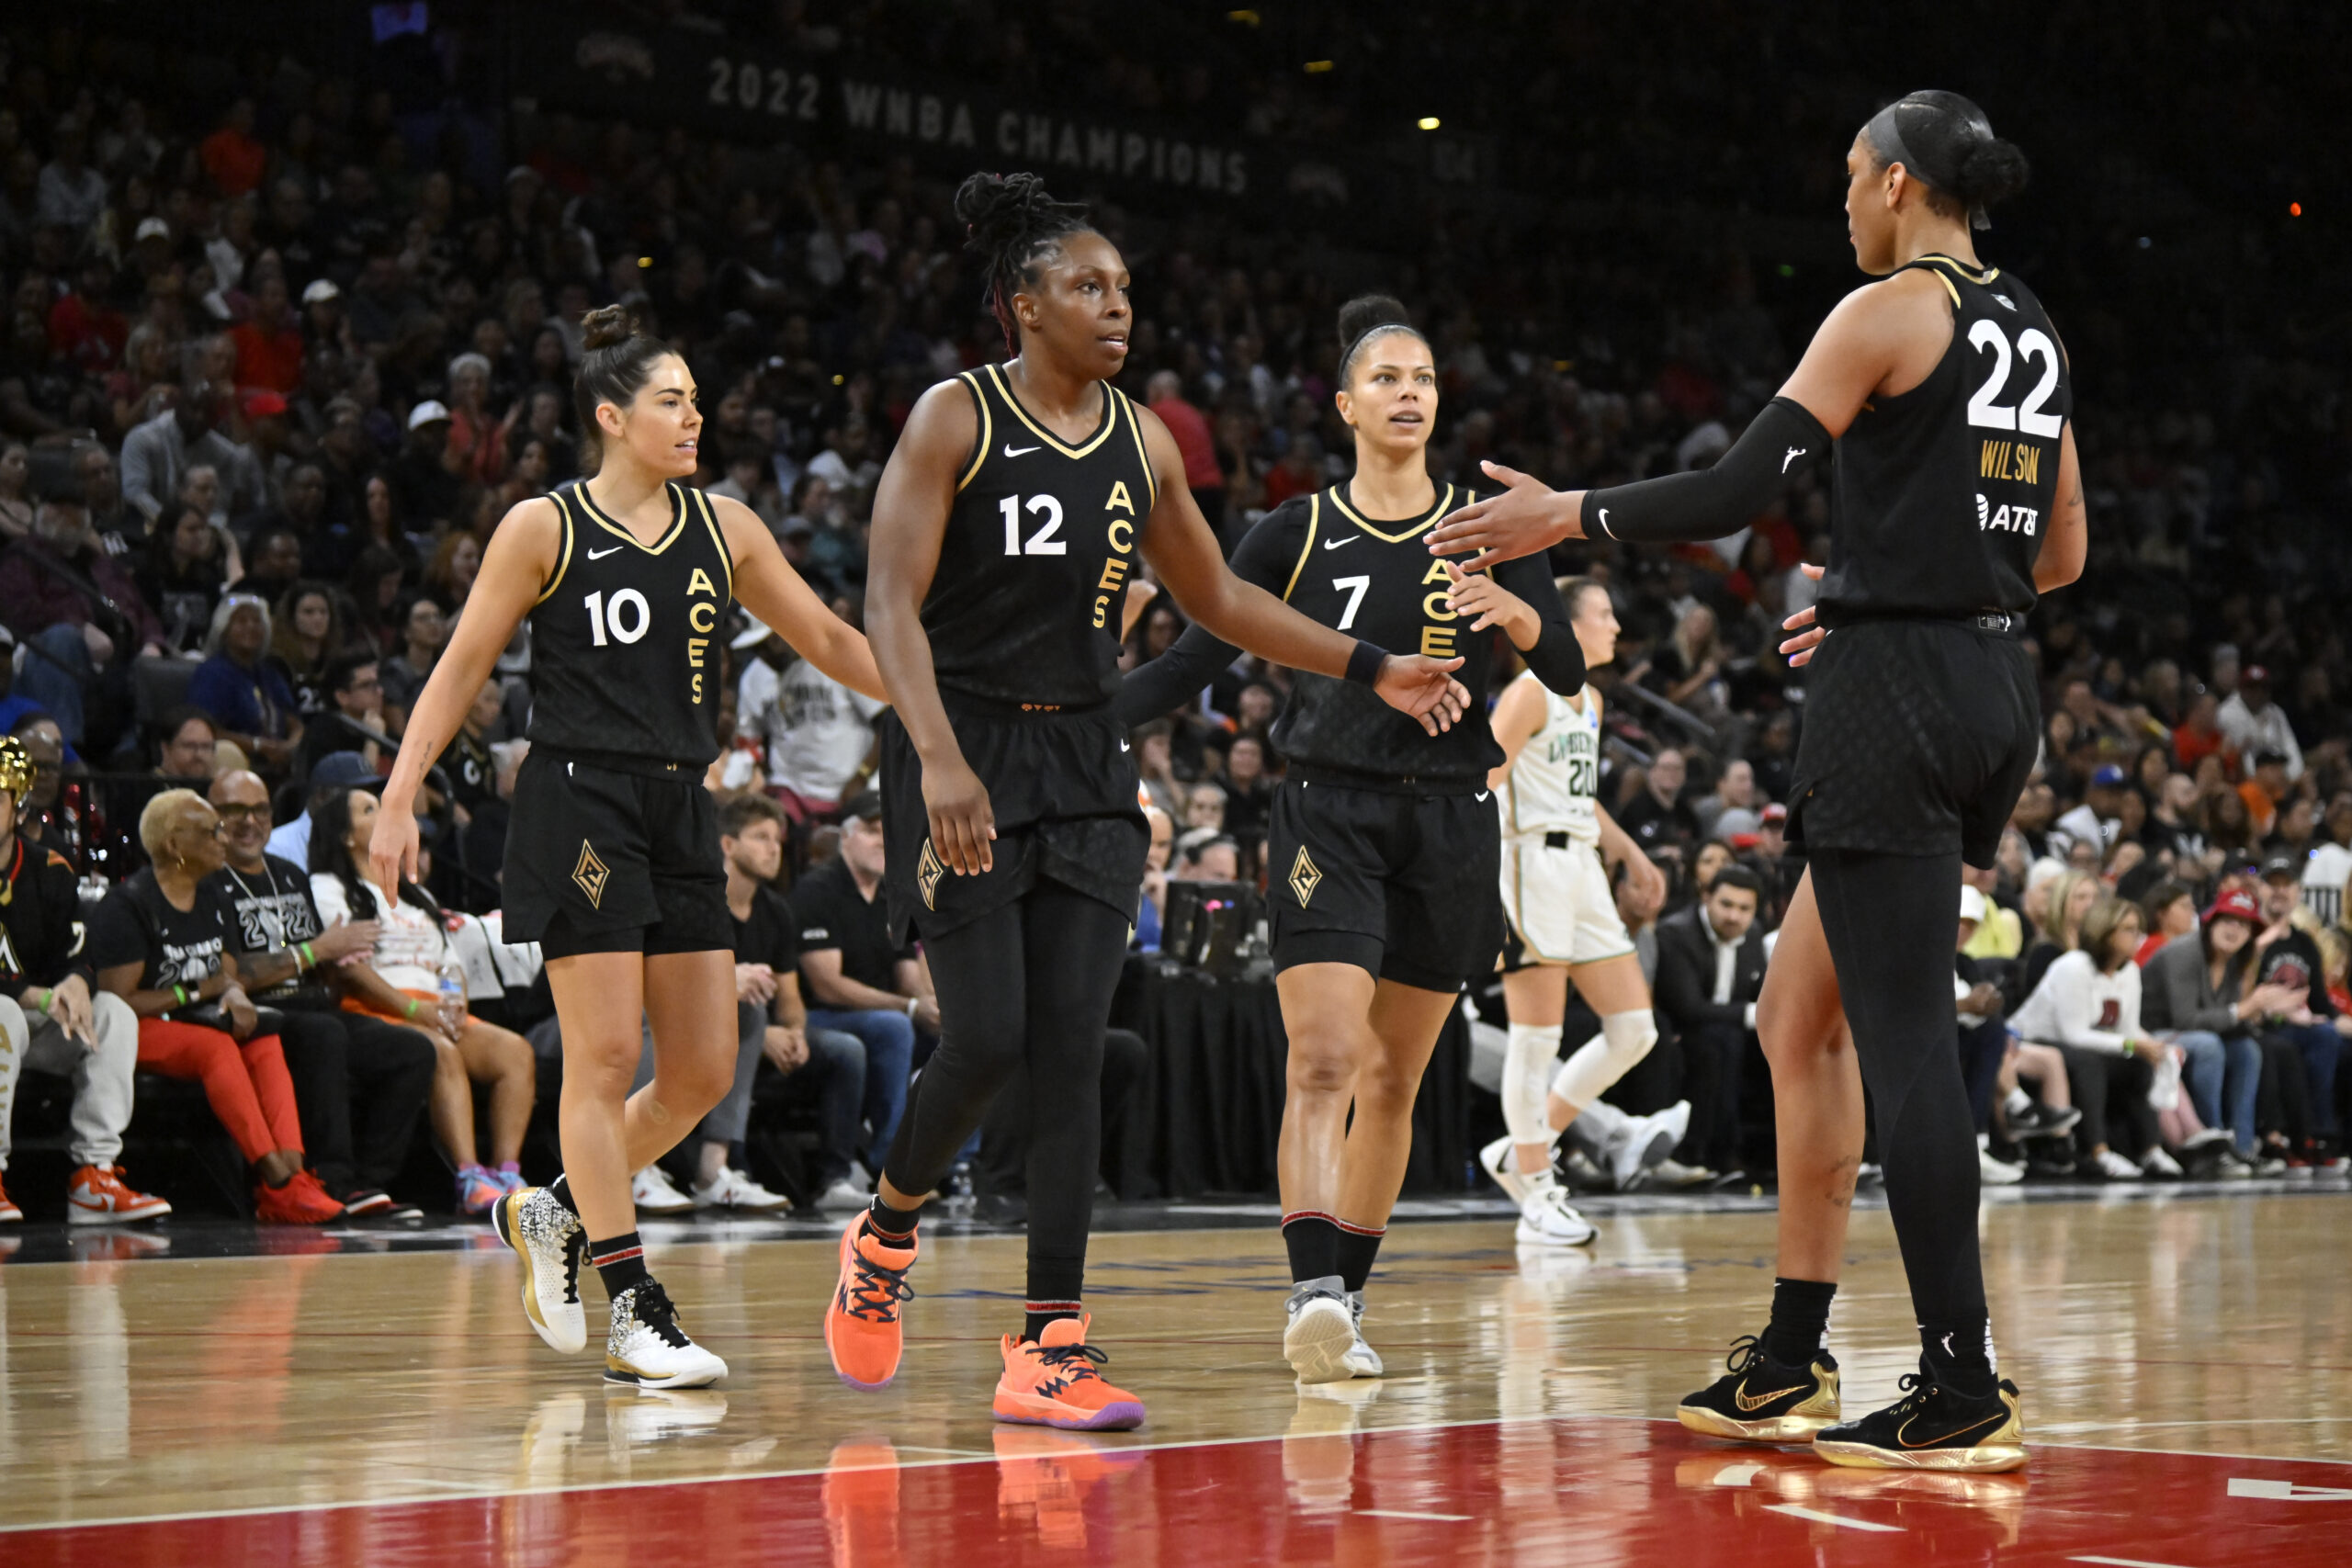 Las Vegas Aces to have 3 starters in WNBA All-Star Game, Aces